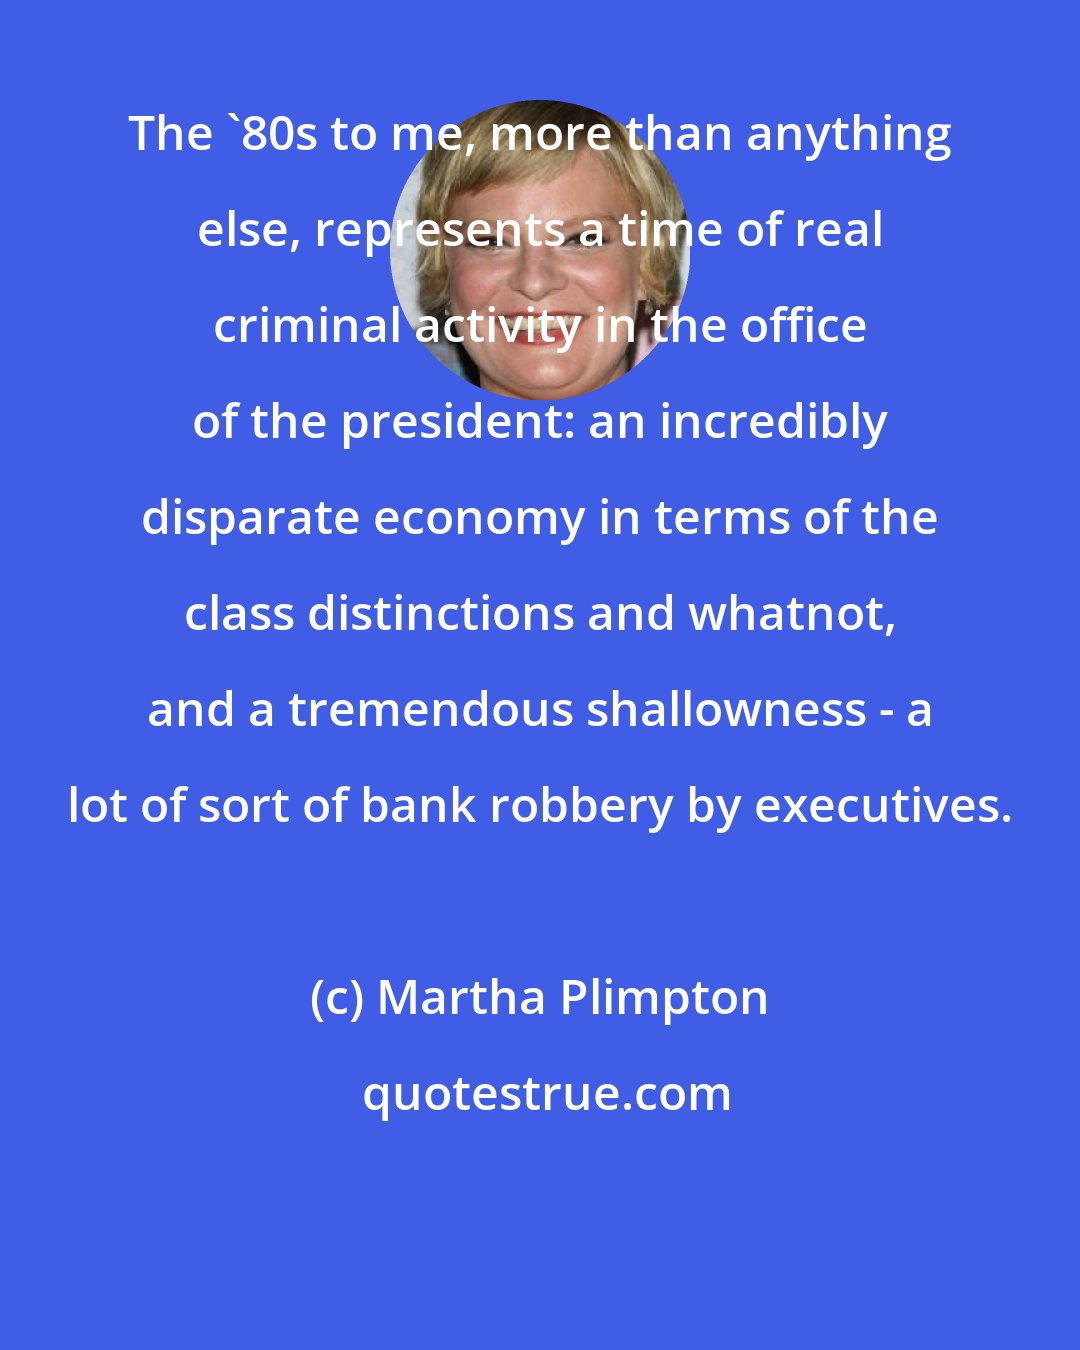 Martha Plimpton: The '80s to me, more than anything else, represents a time of real criminal activity in the office of the president: an incredibly disparate economy in terms of the class distinctions and whatnot, and a tremendous shallowness - a lot of sort of bank robbery by executives.